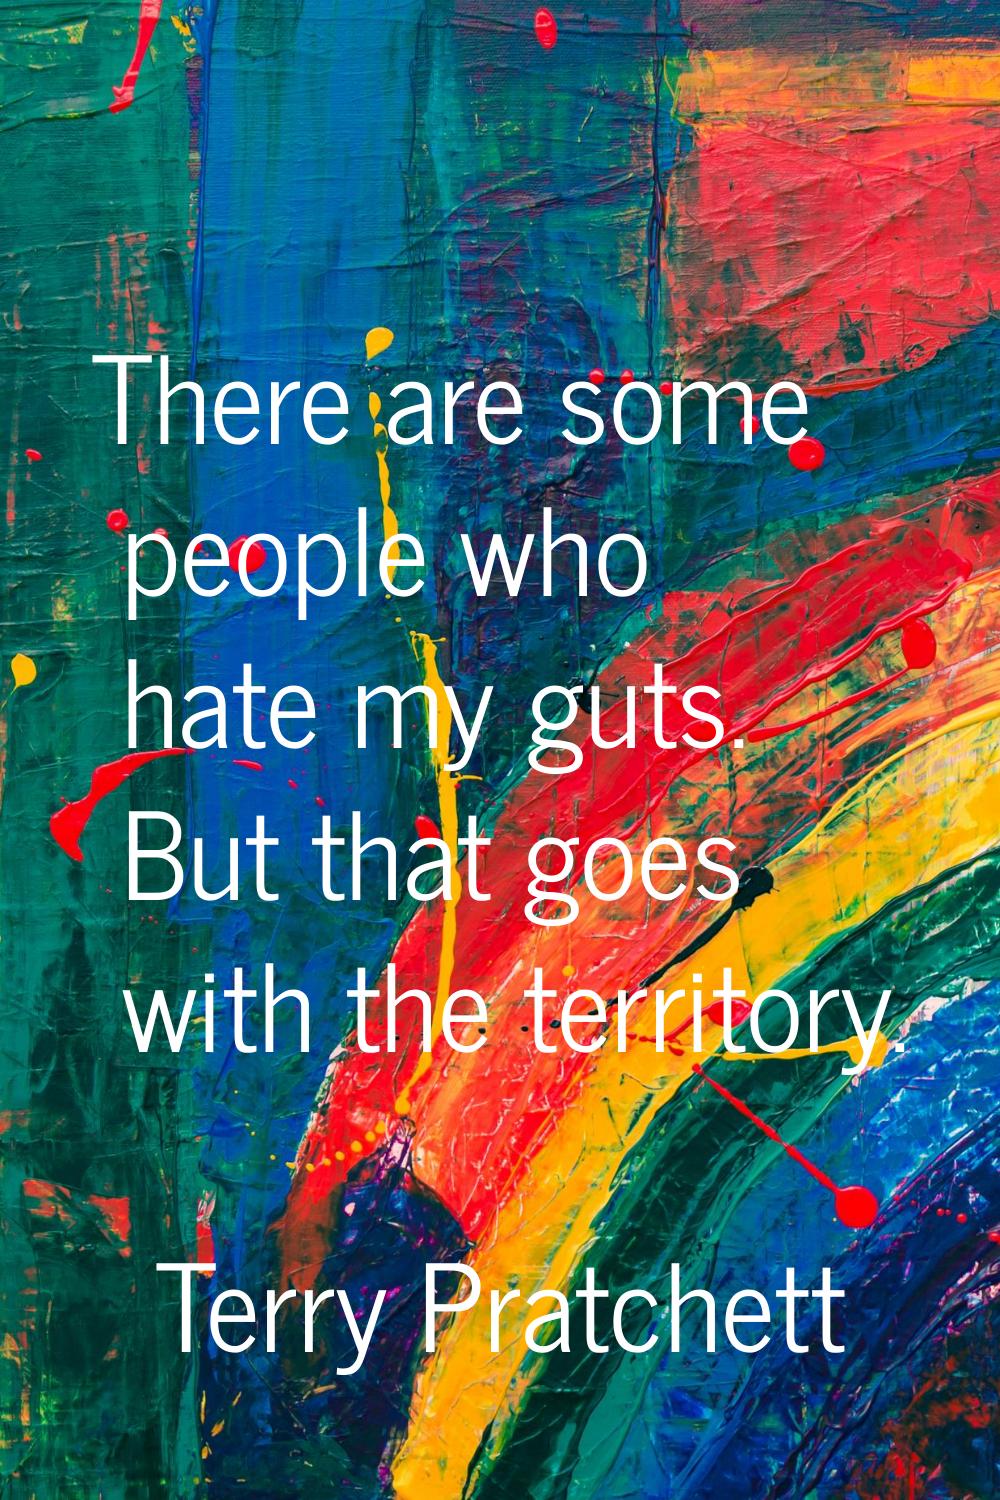 There are some people who hate my guts. But that goes with the territory.